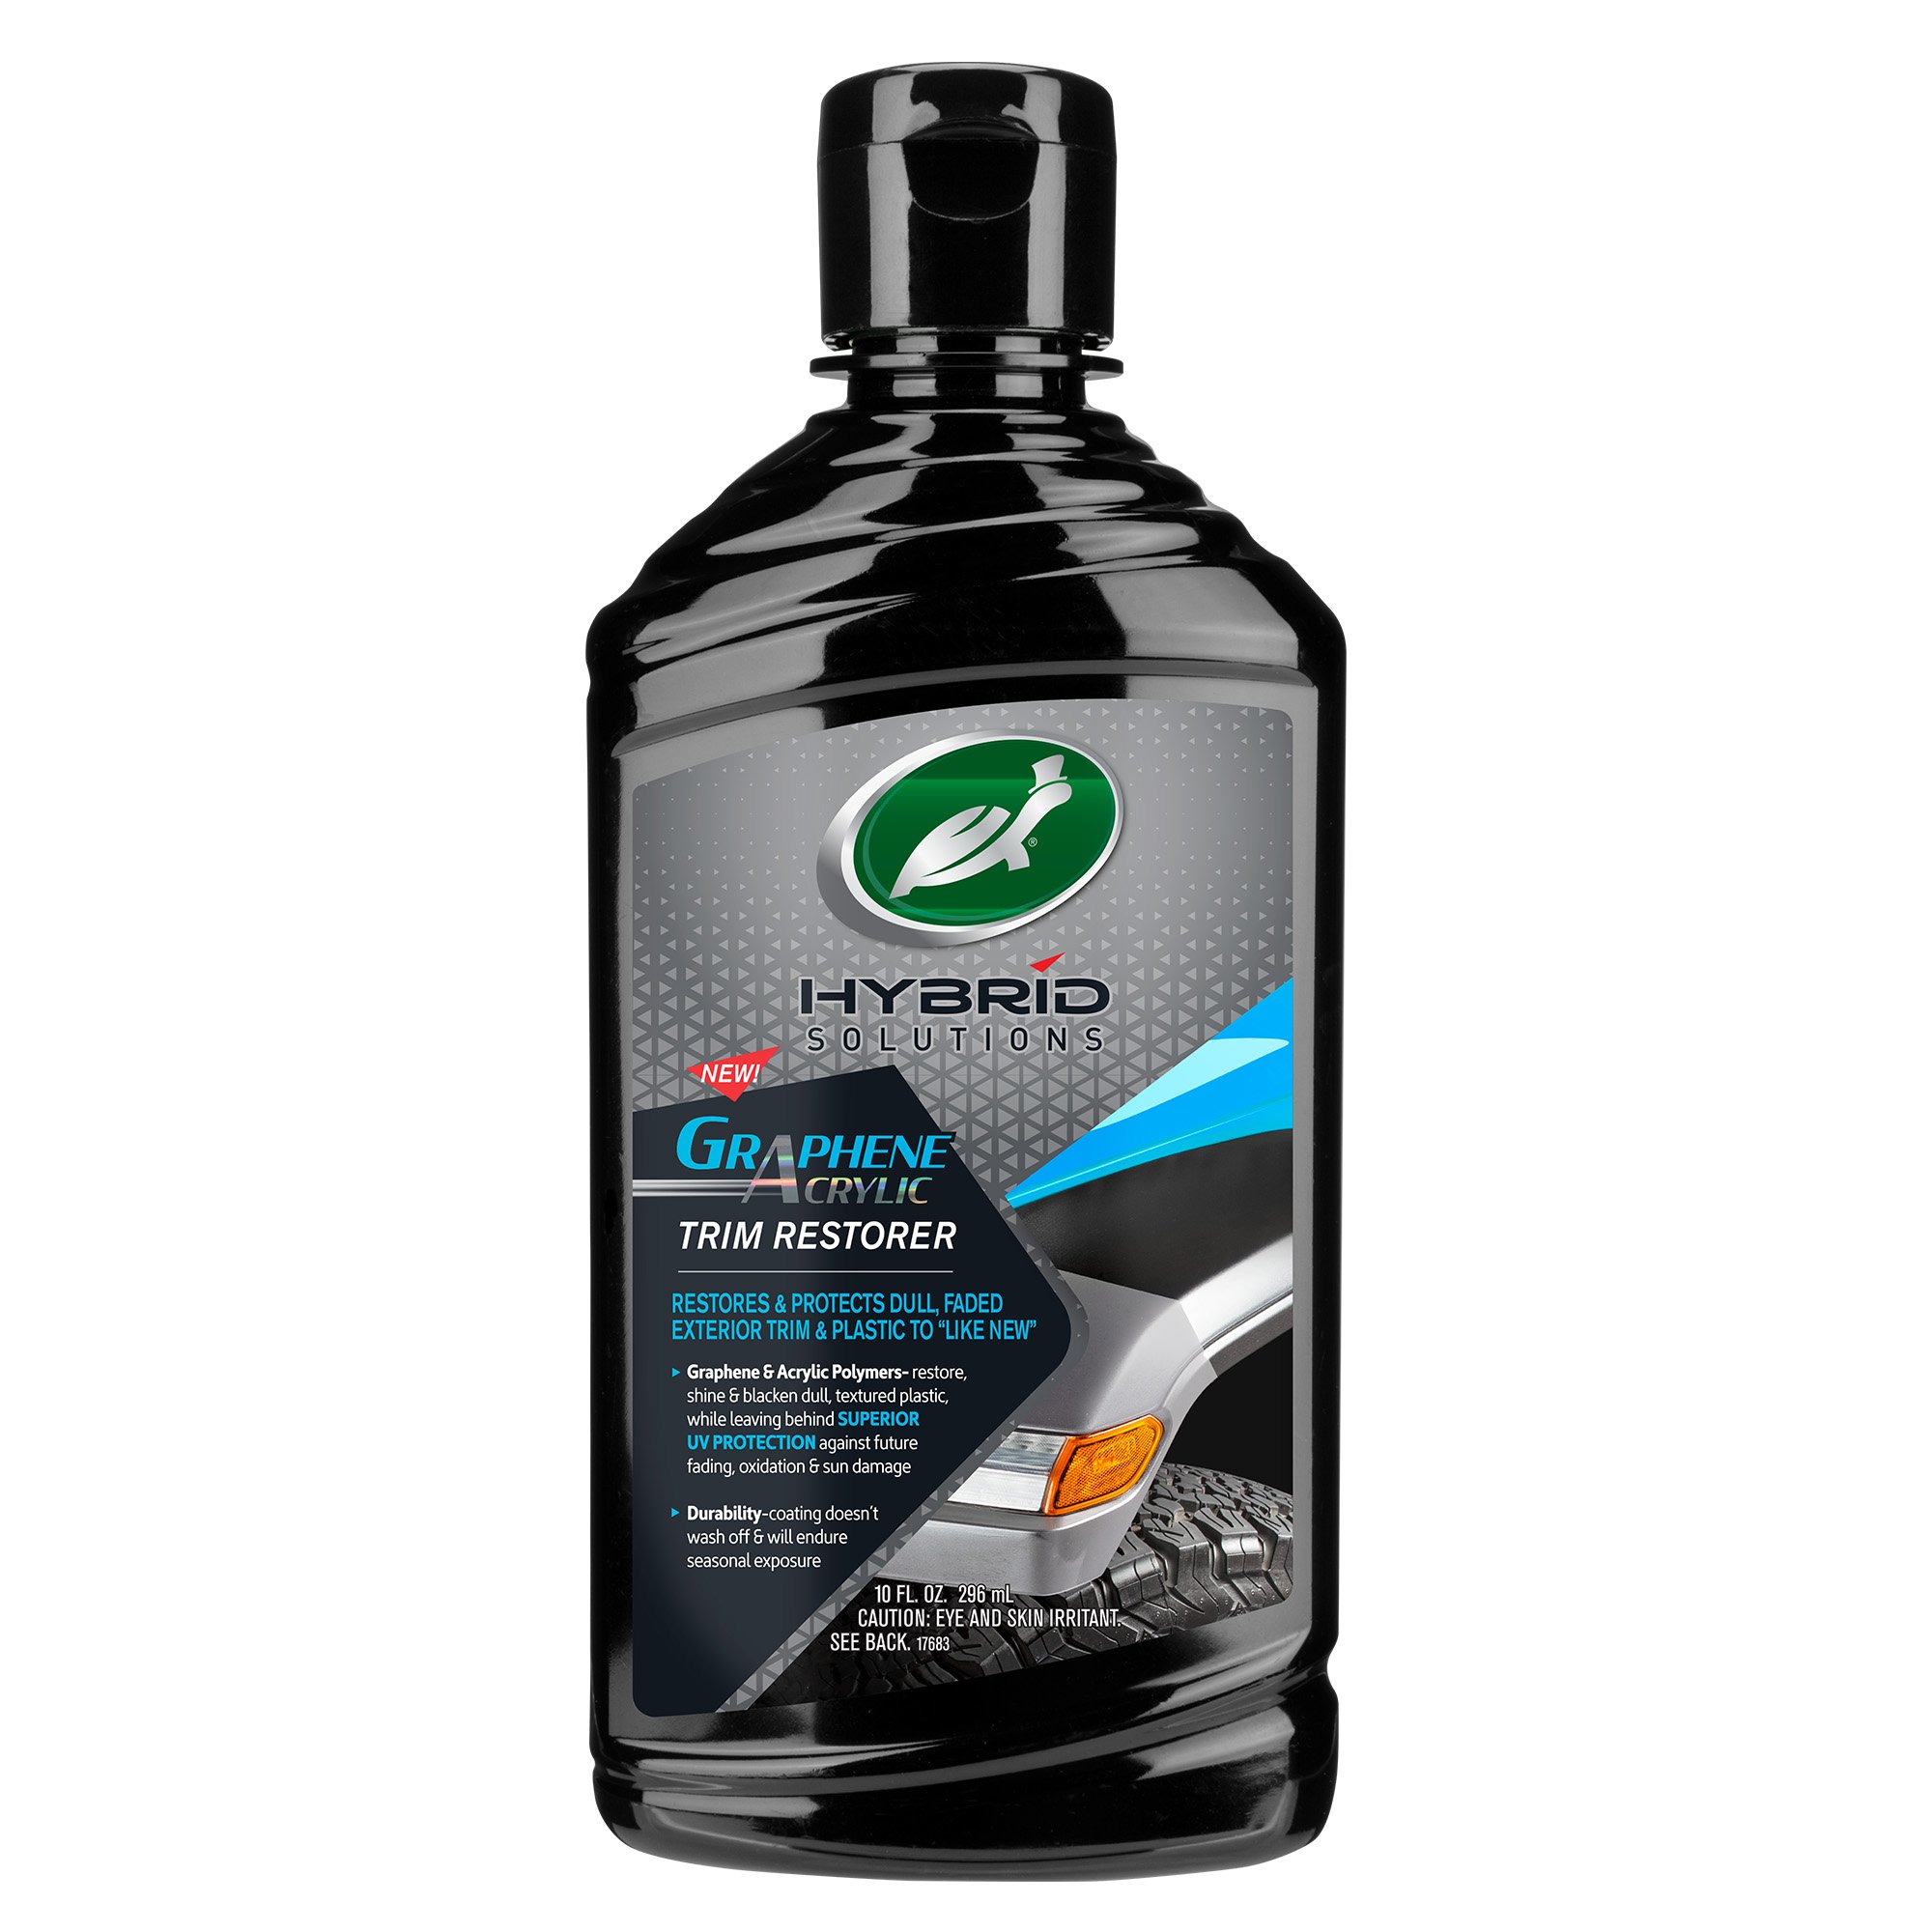 Turtle Wax Hybrid Solutions Pro Graphene Infused Flex Wax - Shop Automotive  Cleaners at H-E-B